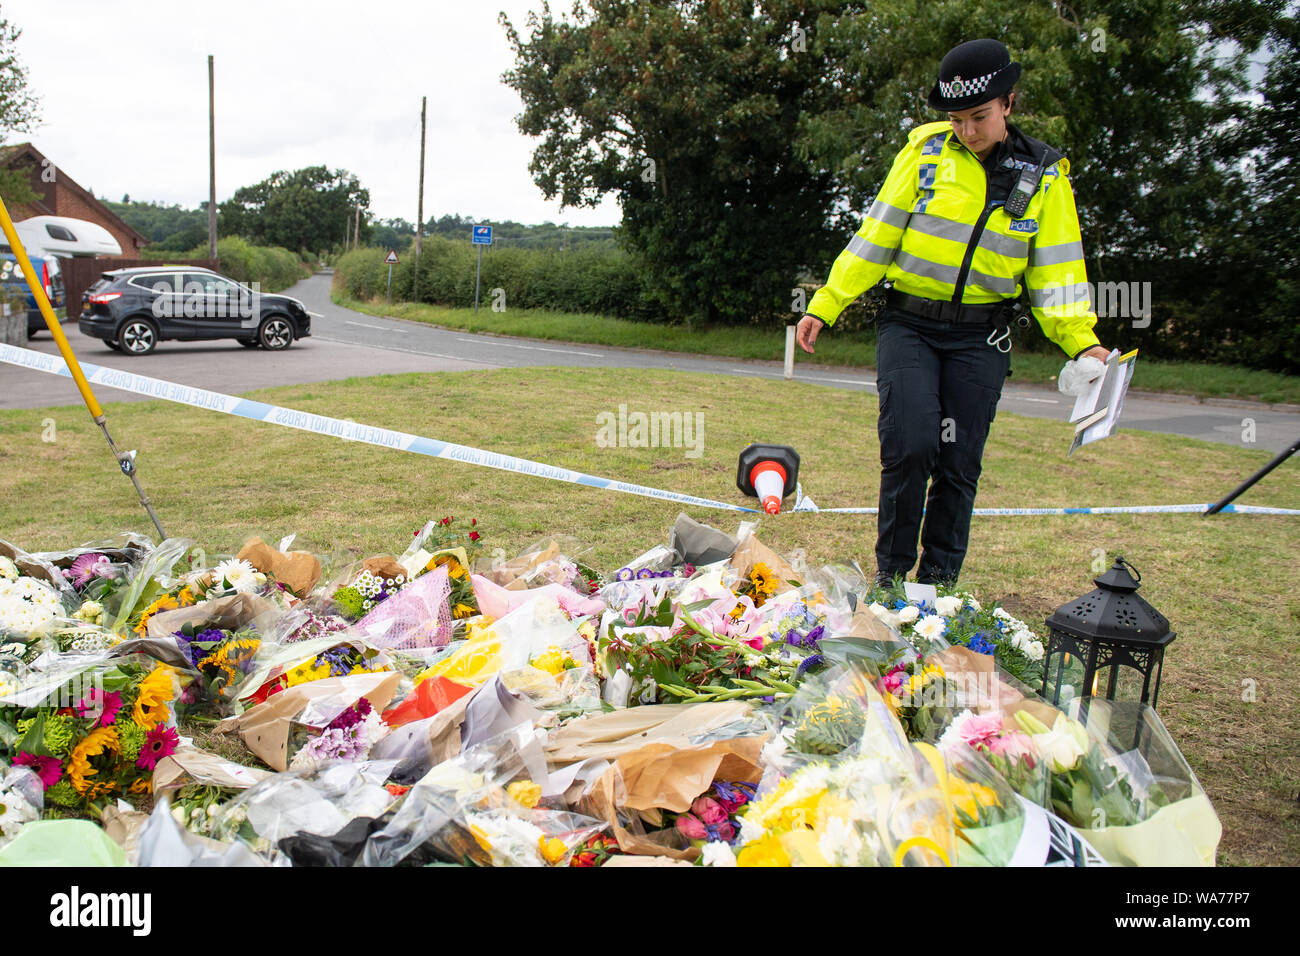 Tributes left near the scene where Thames Valley Police officer Pc Andrew Harper, 28, died following a 'serious incident' at about 11.30pm on Thursday near the A4 Bath Road, between Reading and Newbury, at the village of Sulhamstead in Berkshire. Stock Photo